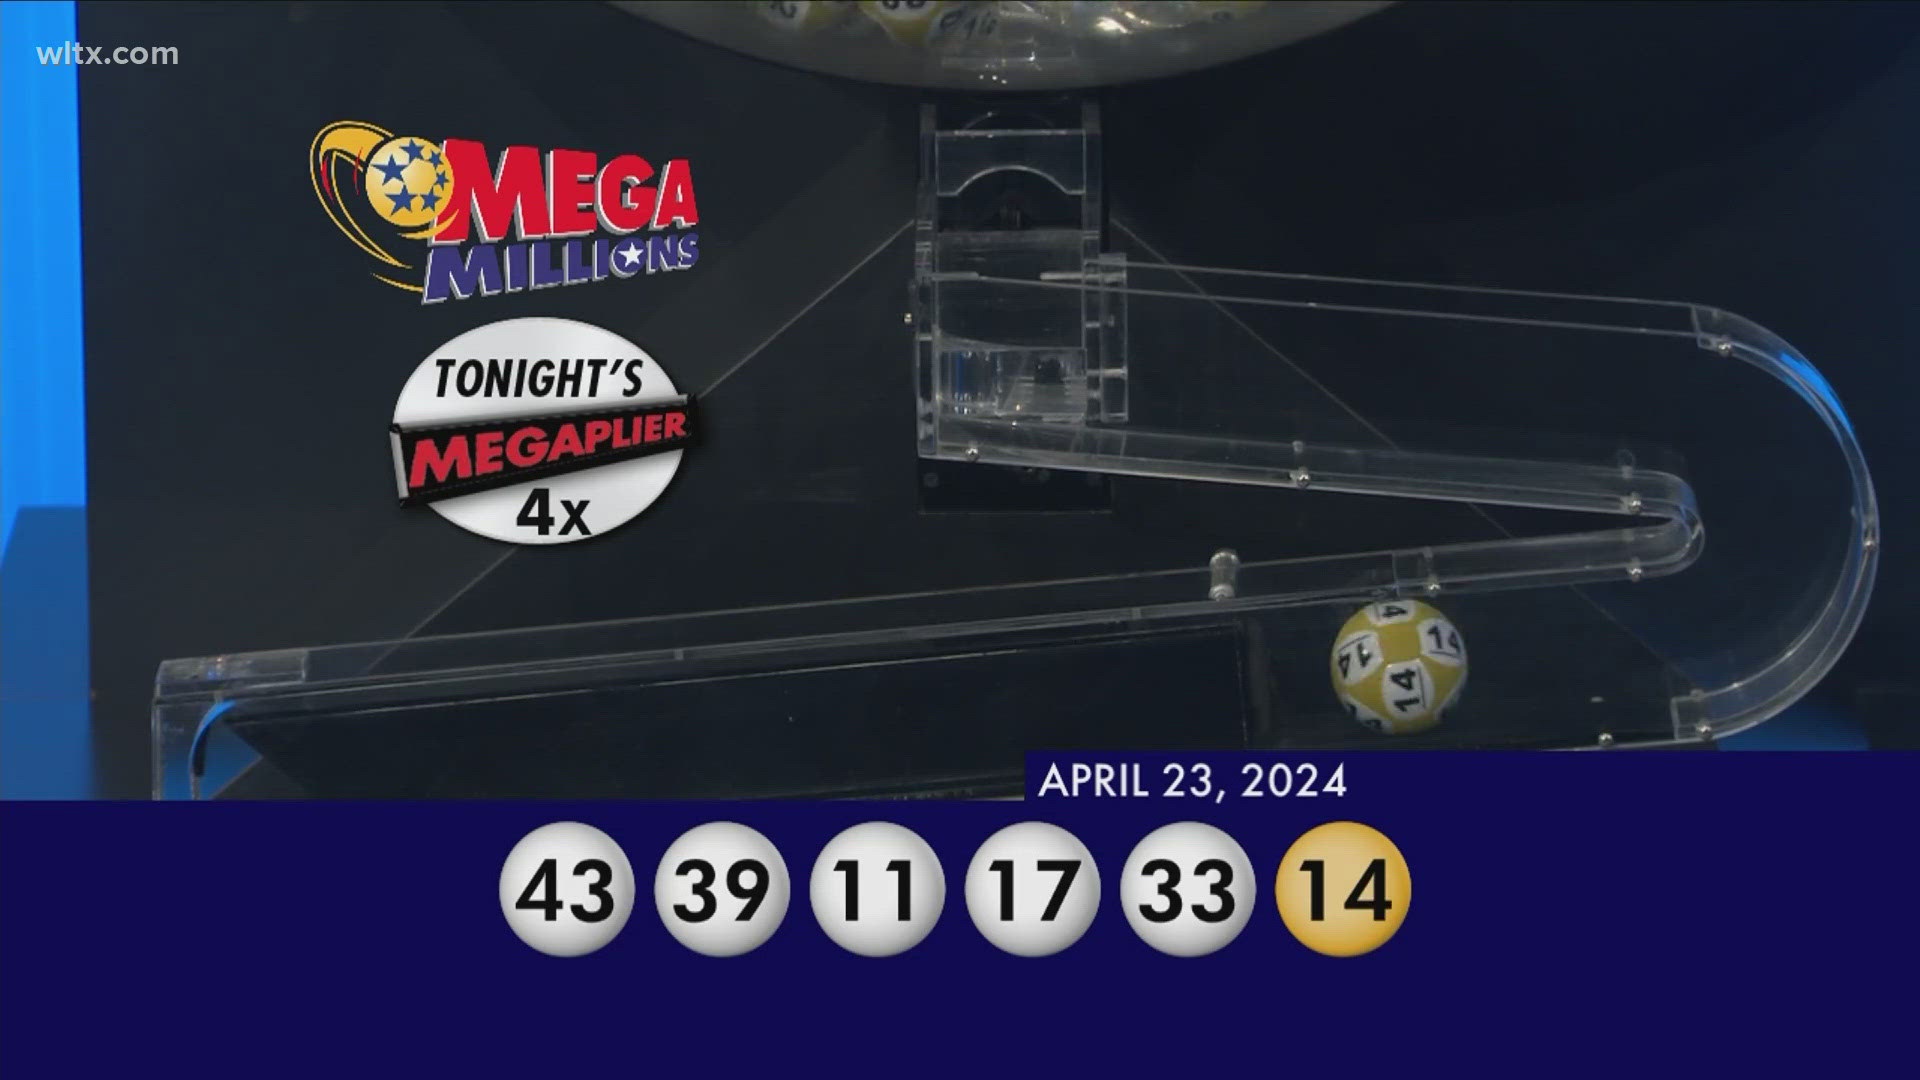 Here are the winning MegaMillions numbers for April 23, 2024.